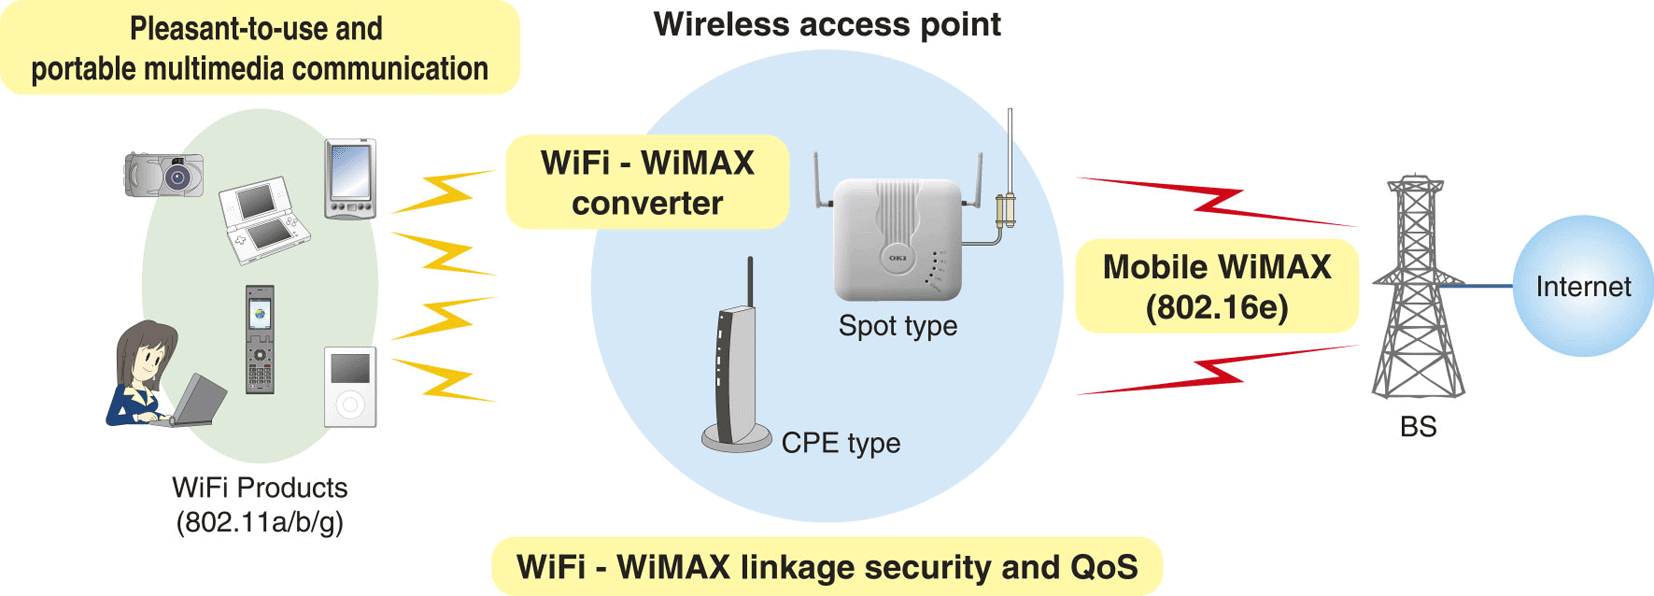 There are several types of WiMAX converters and end-user devices. This illustration shows the signal progression from Internet to end-user. No, iPods and Nintendo DS devices do not have WiMAX yet.